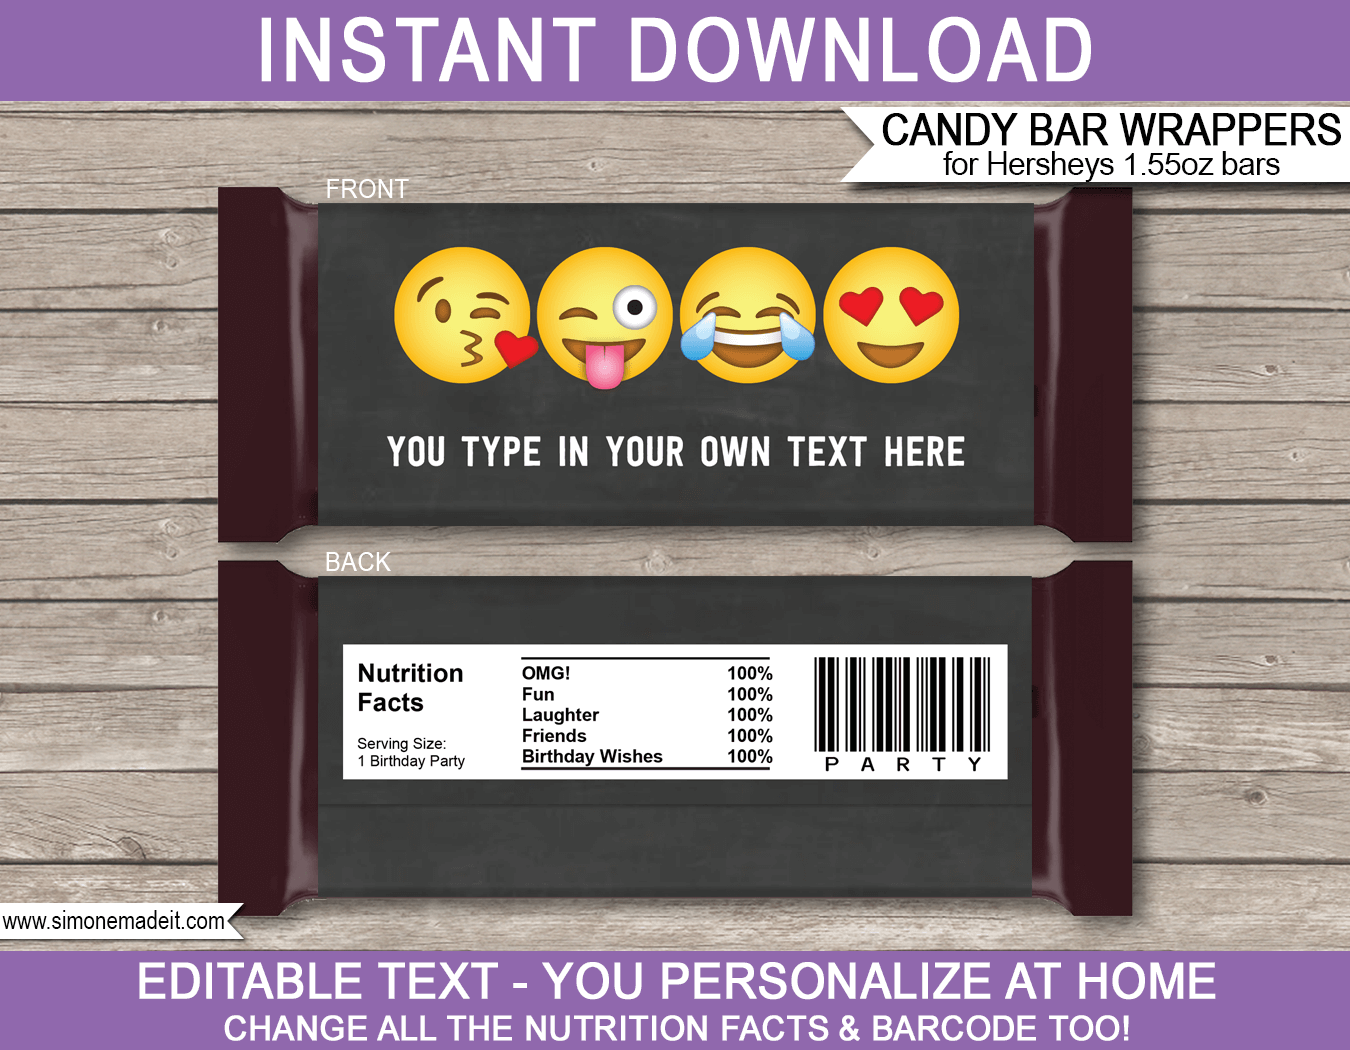 Emoji Candy Bar Wrappers | Emoji Theme Birthday Party Favors | Personalized Candy Bars | Editable Template | INSTANT DOWNLOAD $3.00 via simonemadeit.com